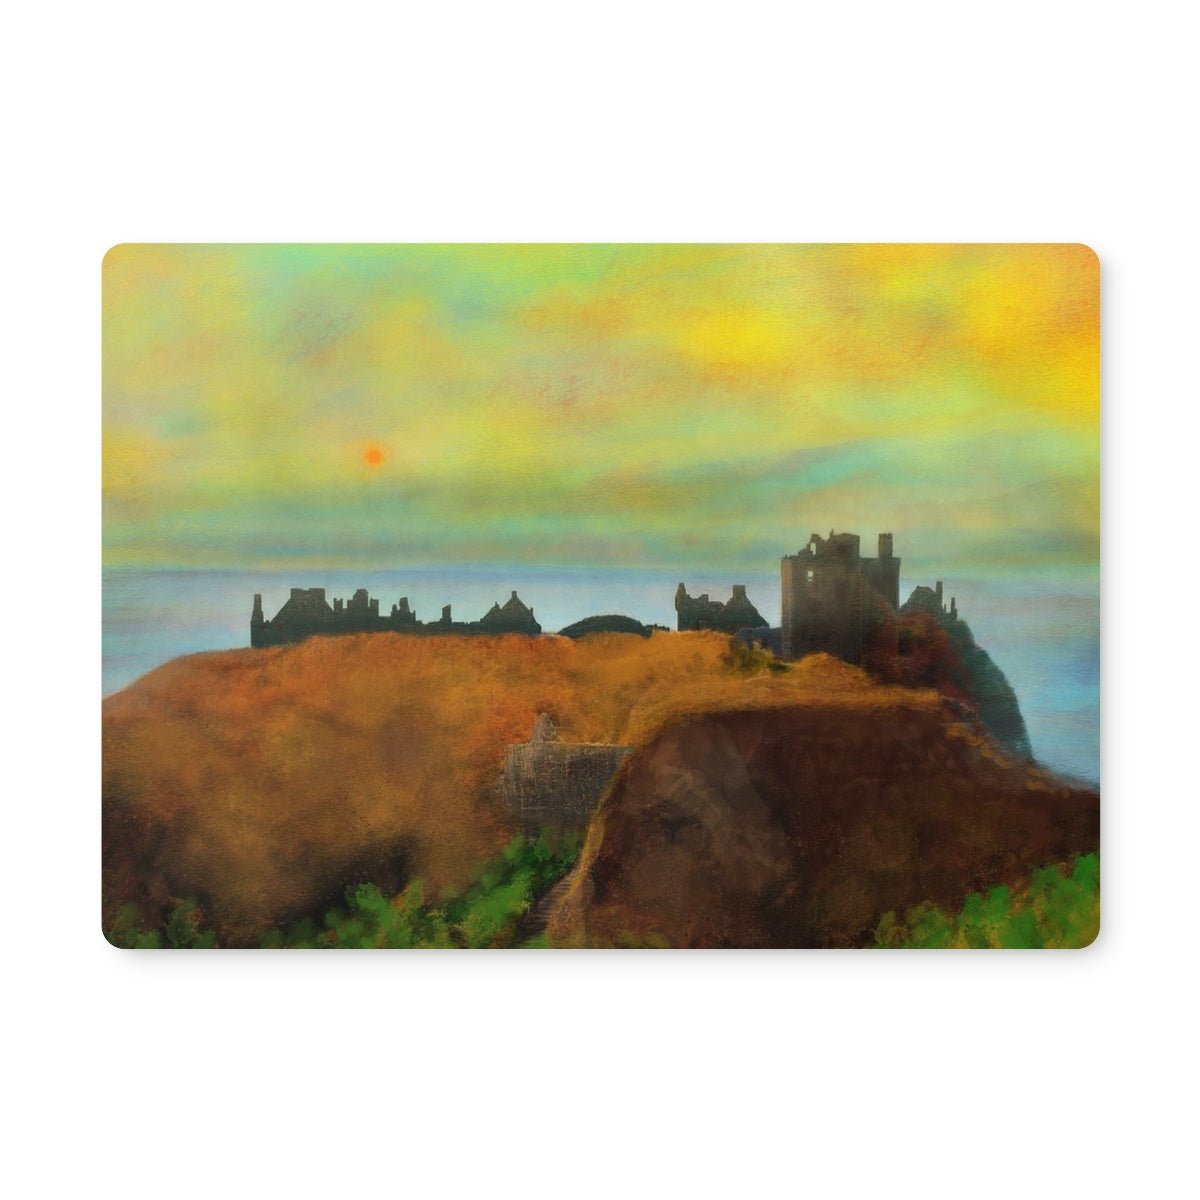 Dunnottar Castle Art Gifts Placemat-Placemats-Scottish Castles Art Gallery-4 Placemats-Paintings, Prints, Homeware, Art Gifts From Scotland By Scottish Artist Kevin Hunter